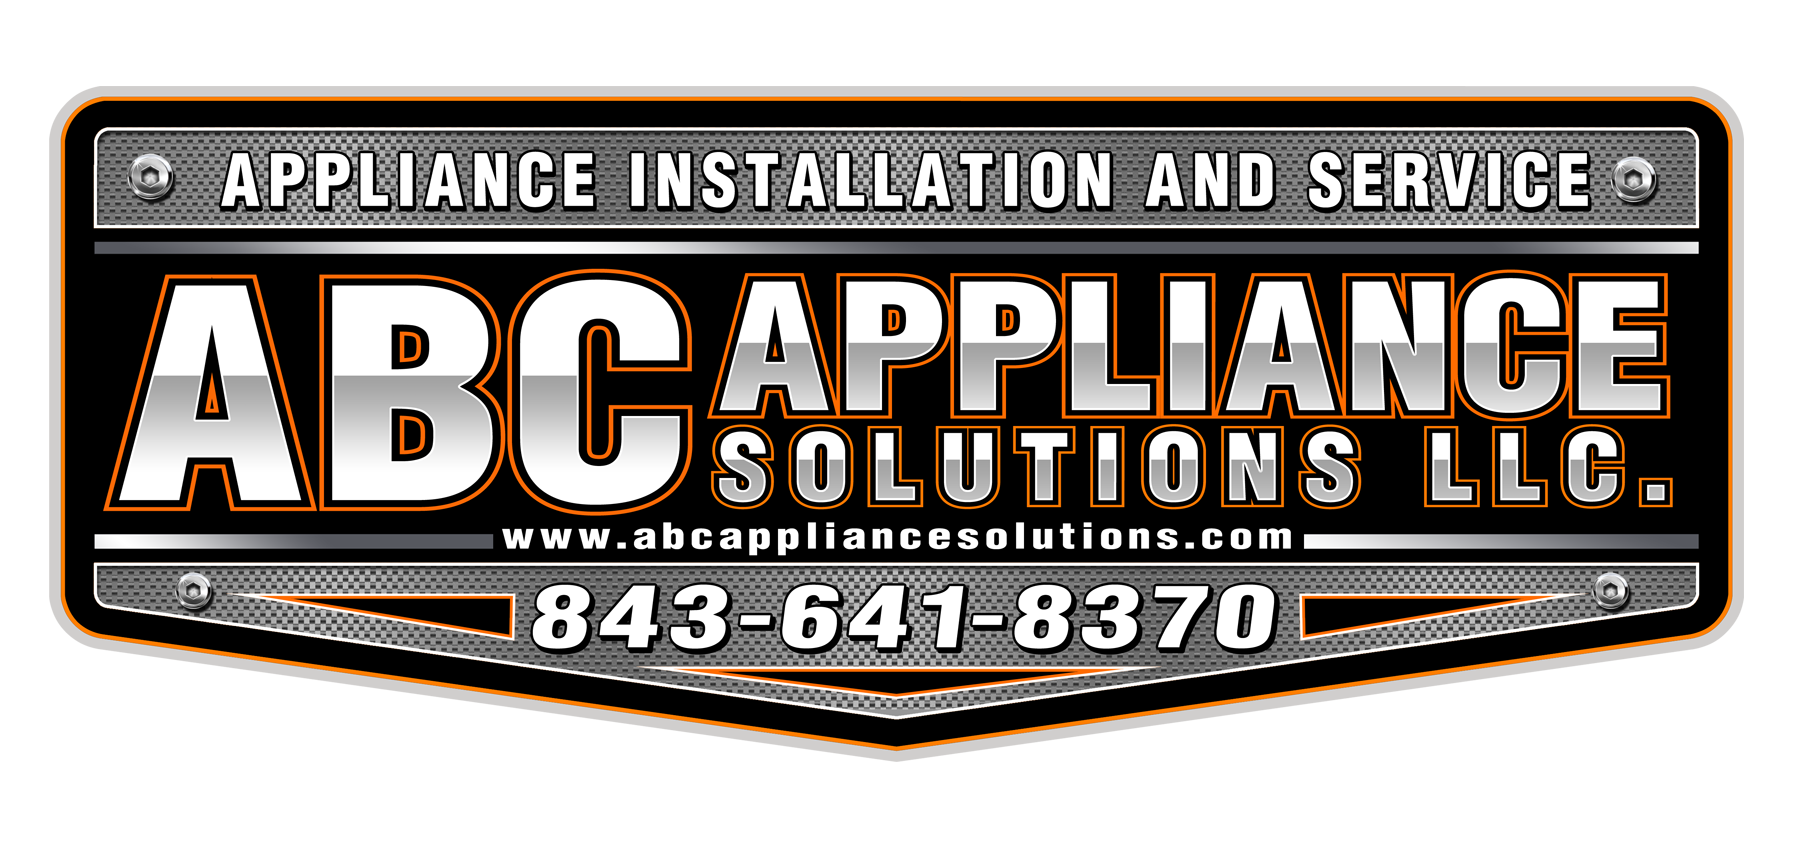 ABC Appliance Solutions Logo